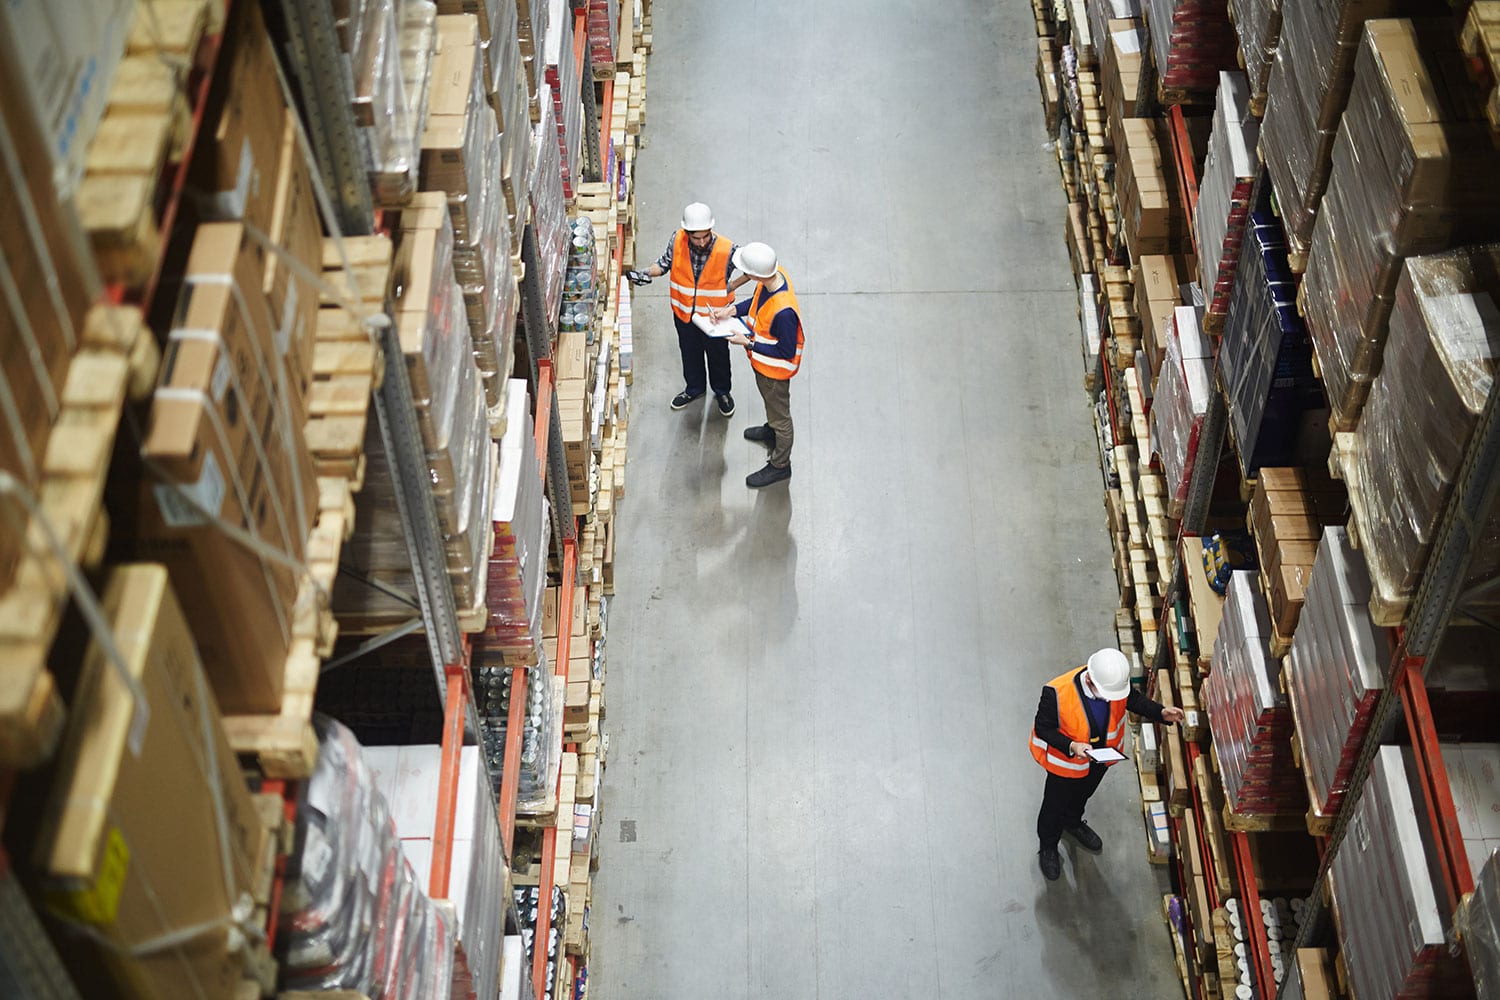 Men doing inventory in the warehouse